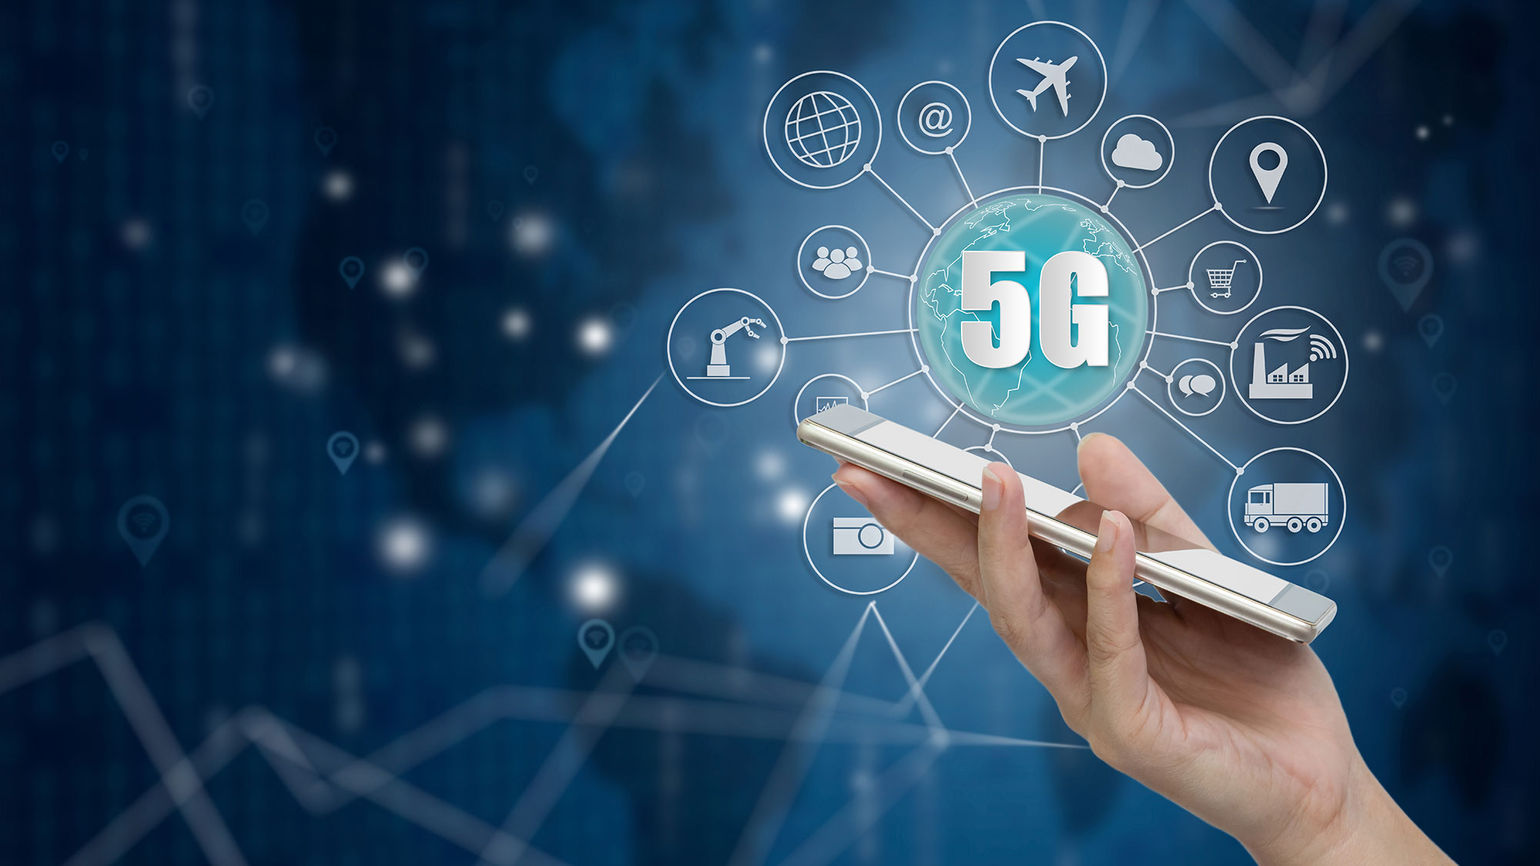 FAA issues safety warning about 5G interference